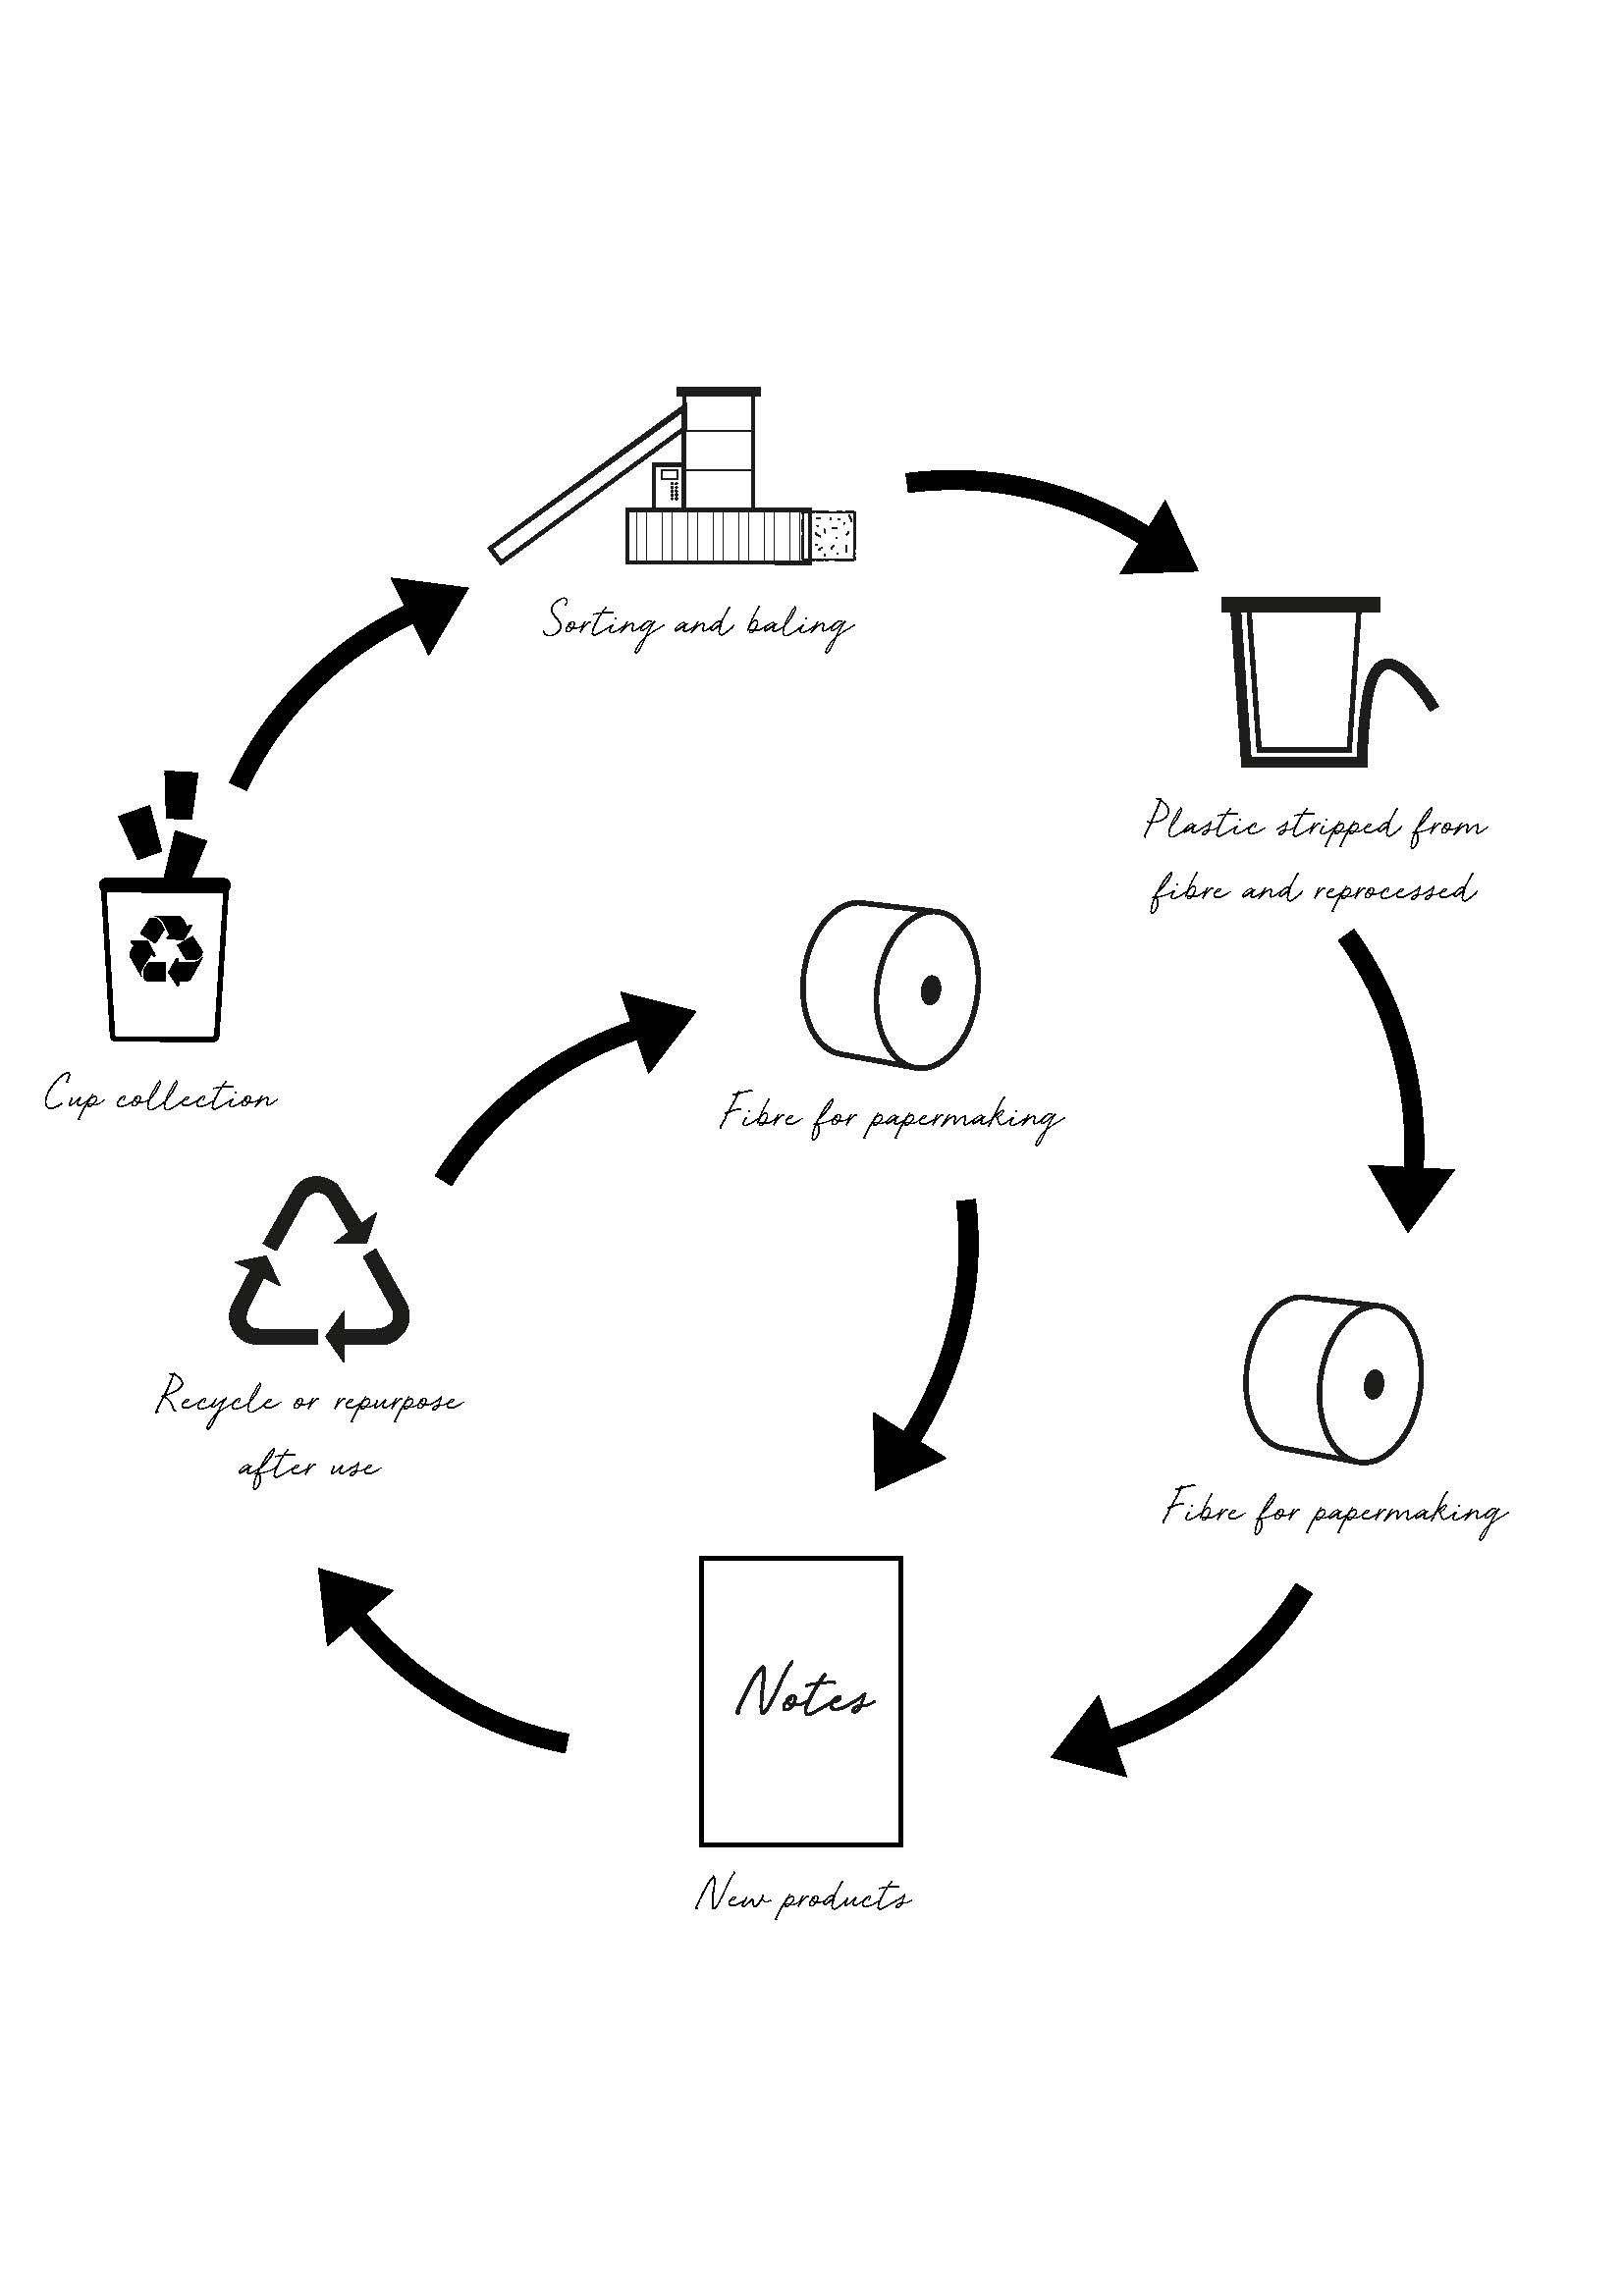 Recycling Diagram